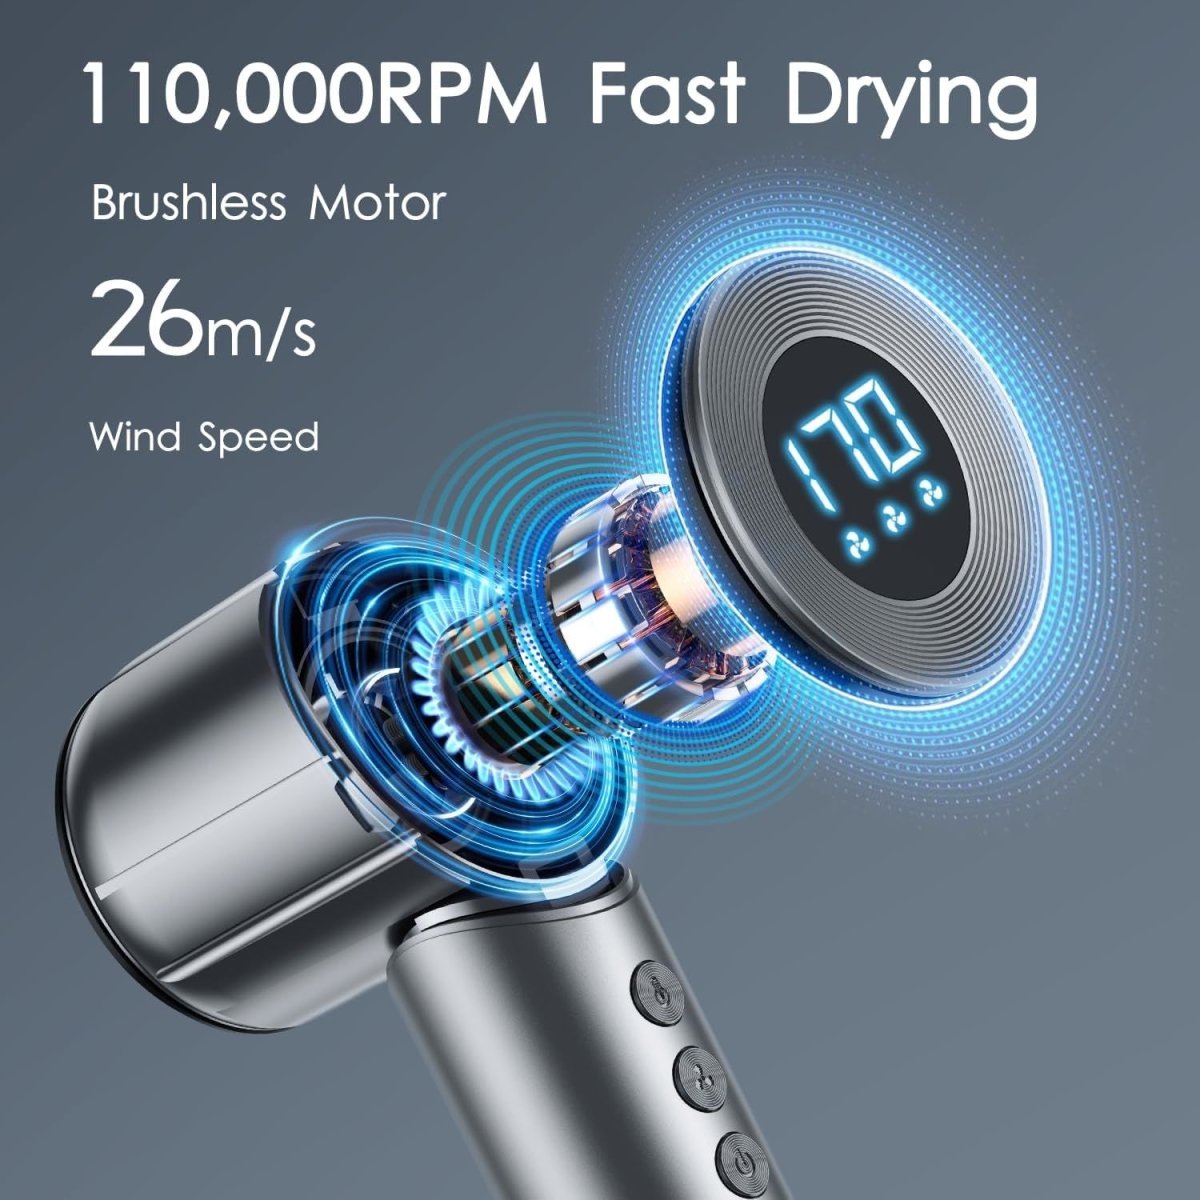 Hair Blow Dryer, Ionic Hair Dryer with Hair Care Module, Professional Hairdryer High-Speed 110, 000 RPM Fast Drying, Low Noise Salon Blow Dryer with LED Temp Display, Negative Ionic for Home Travel3P's Inclusive Beauty